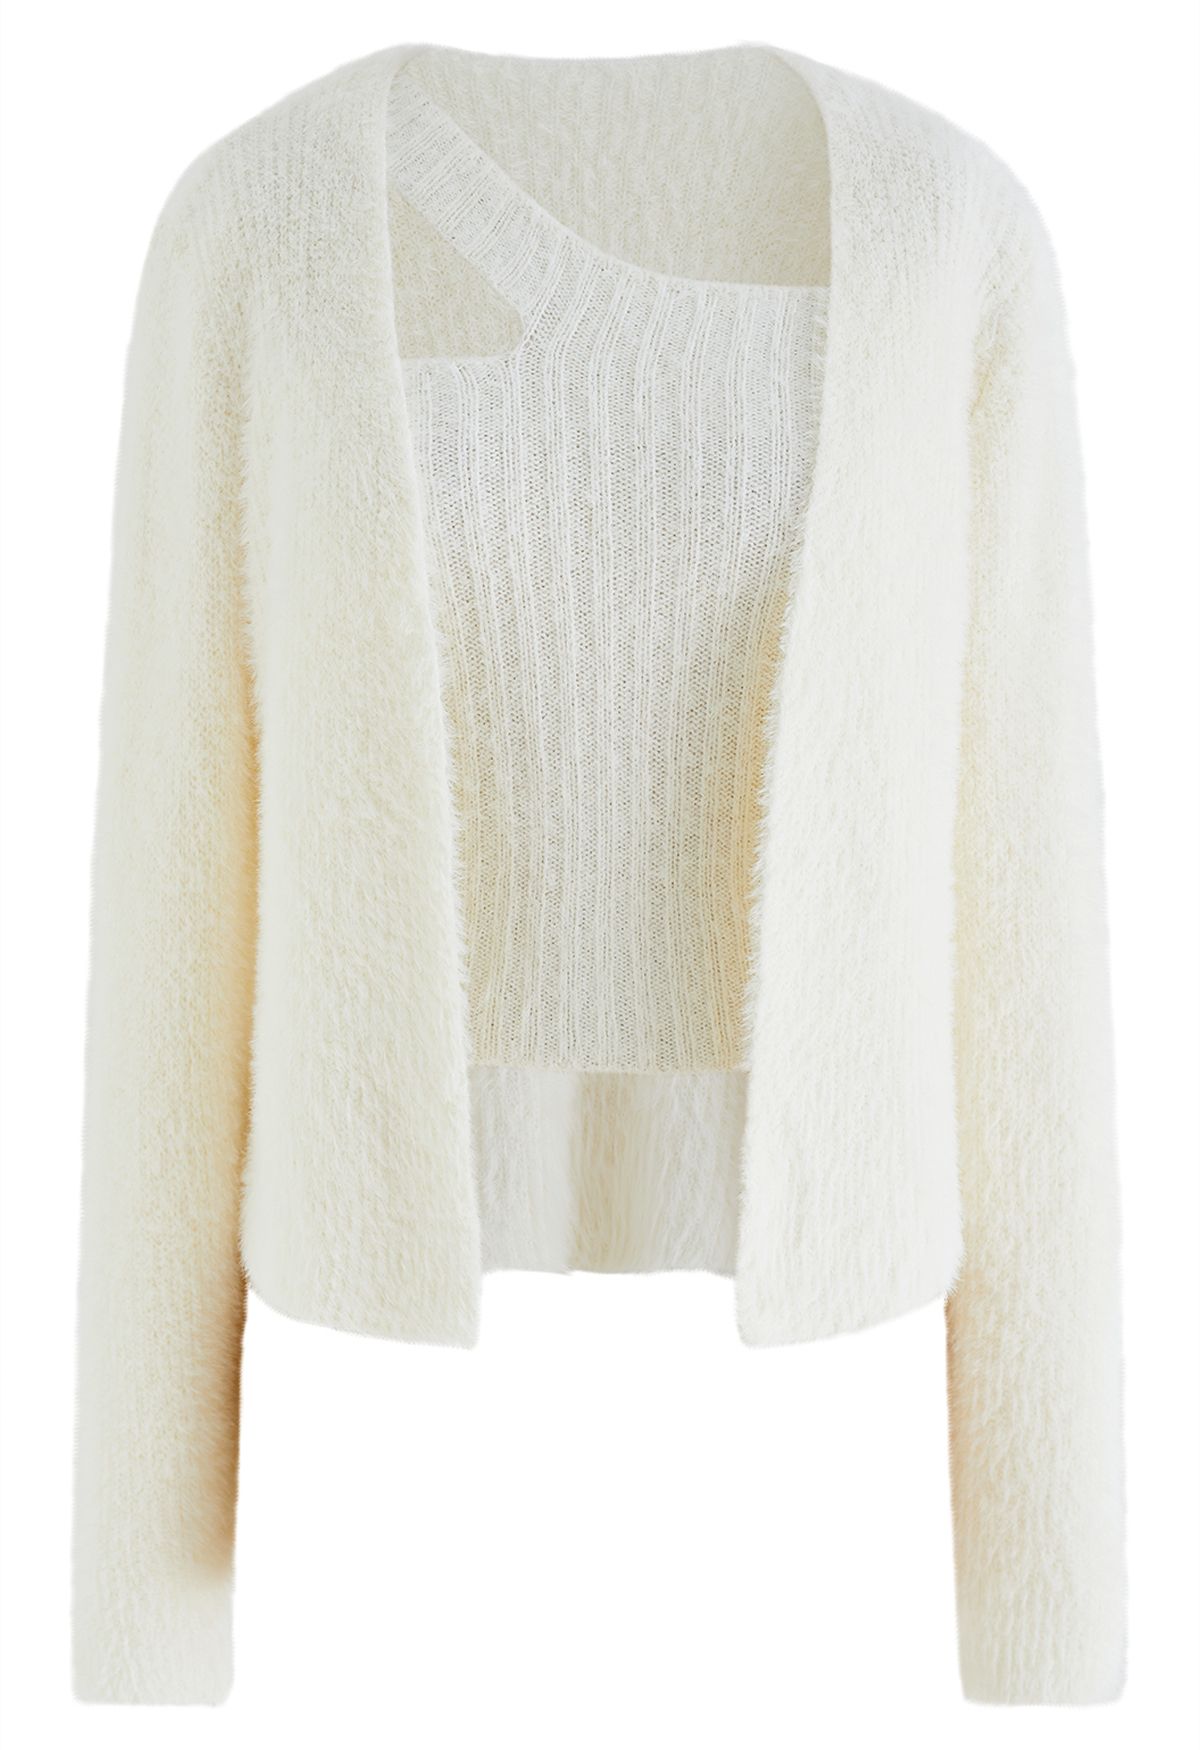 One-Shoulder Fuzzy Knit Top and Cardigan Set in Ivory